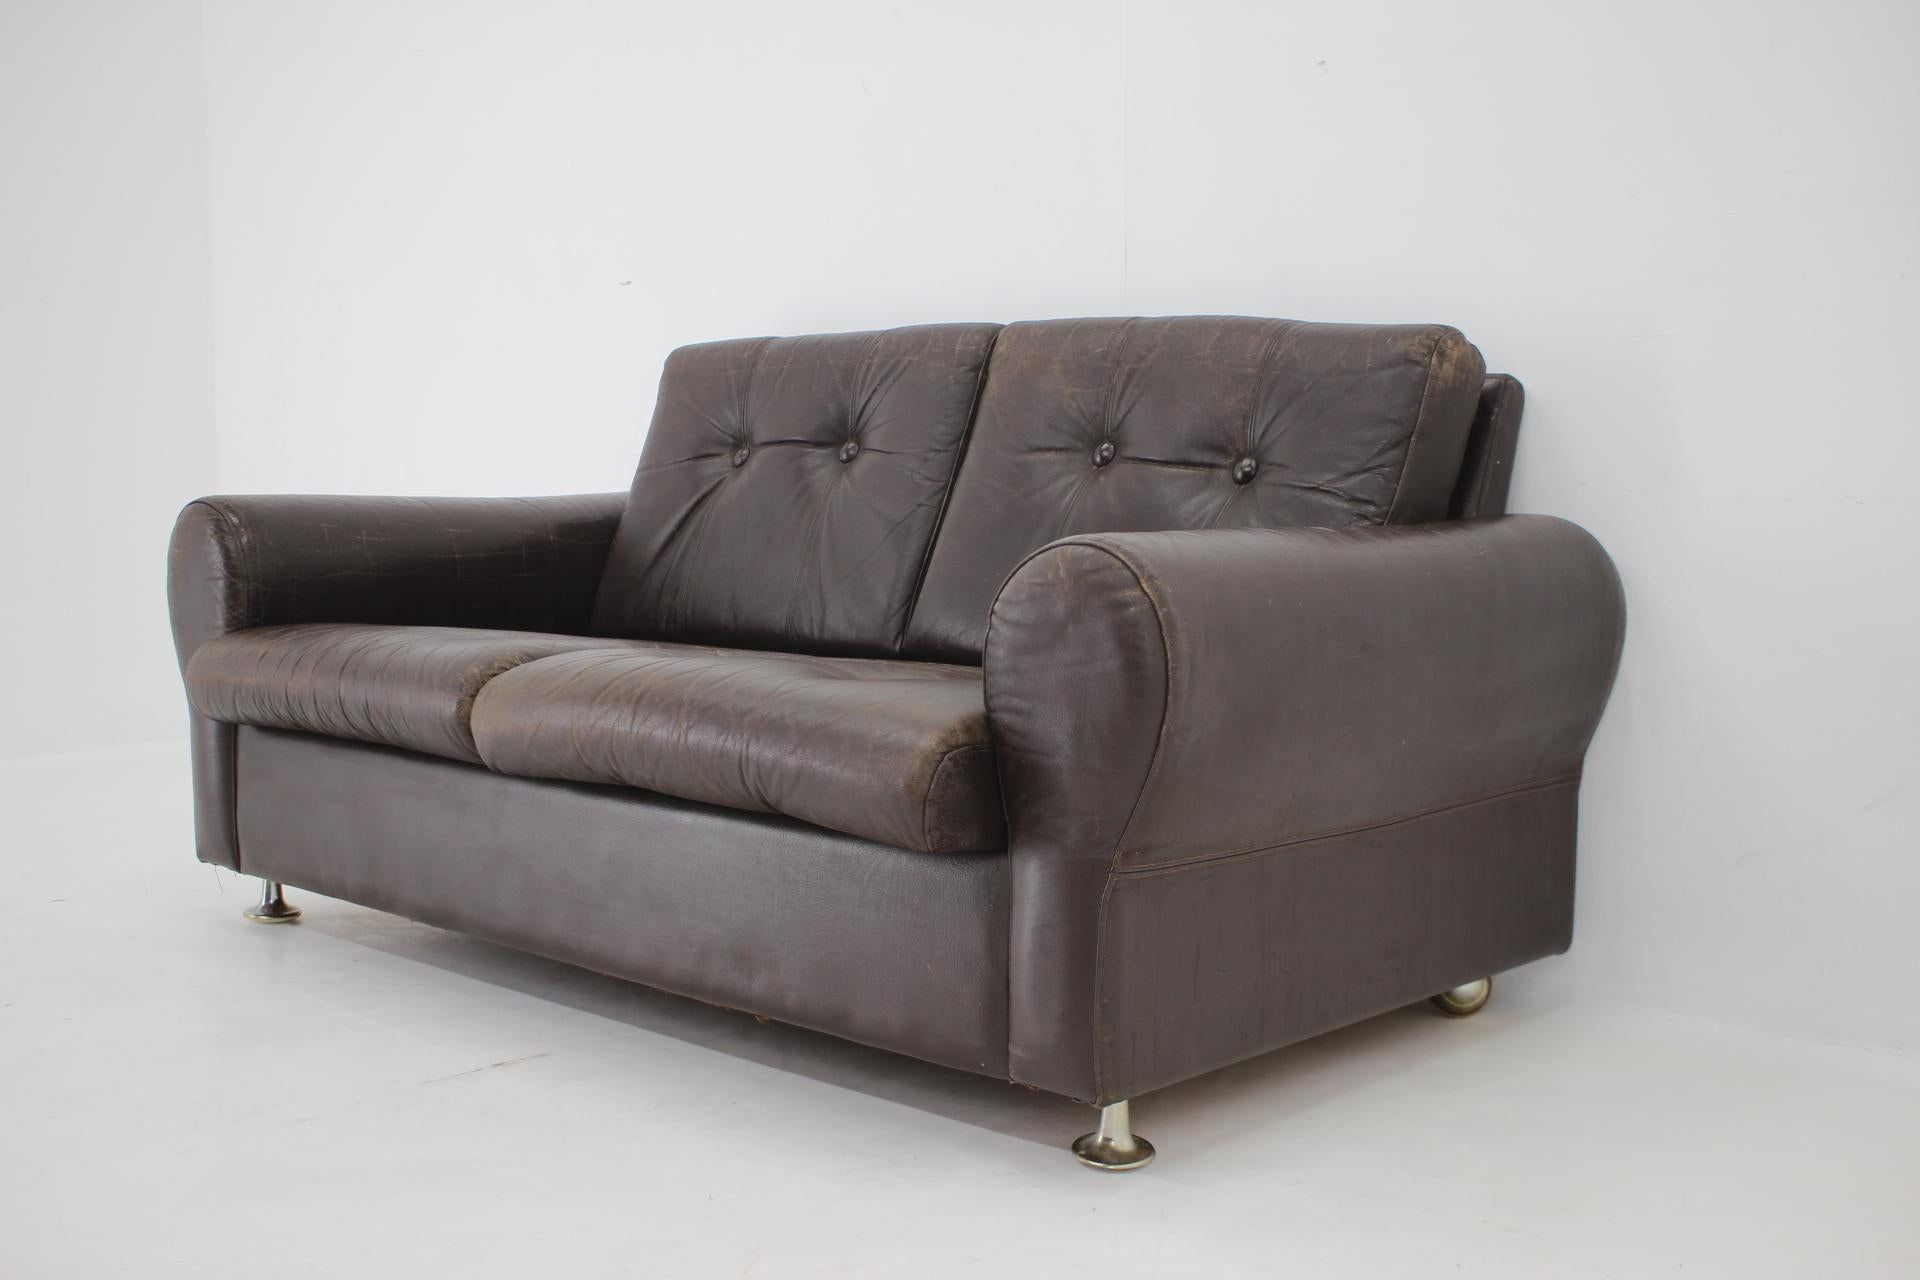 Late 20th Century 1970s Danish Brown Leather 2 Seater Sofa For Sale